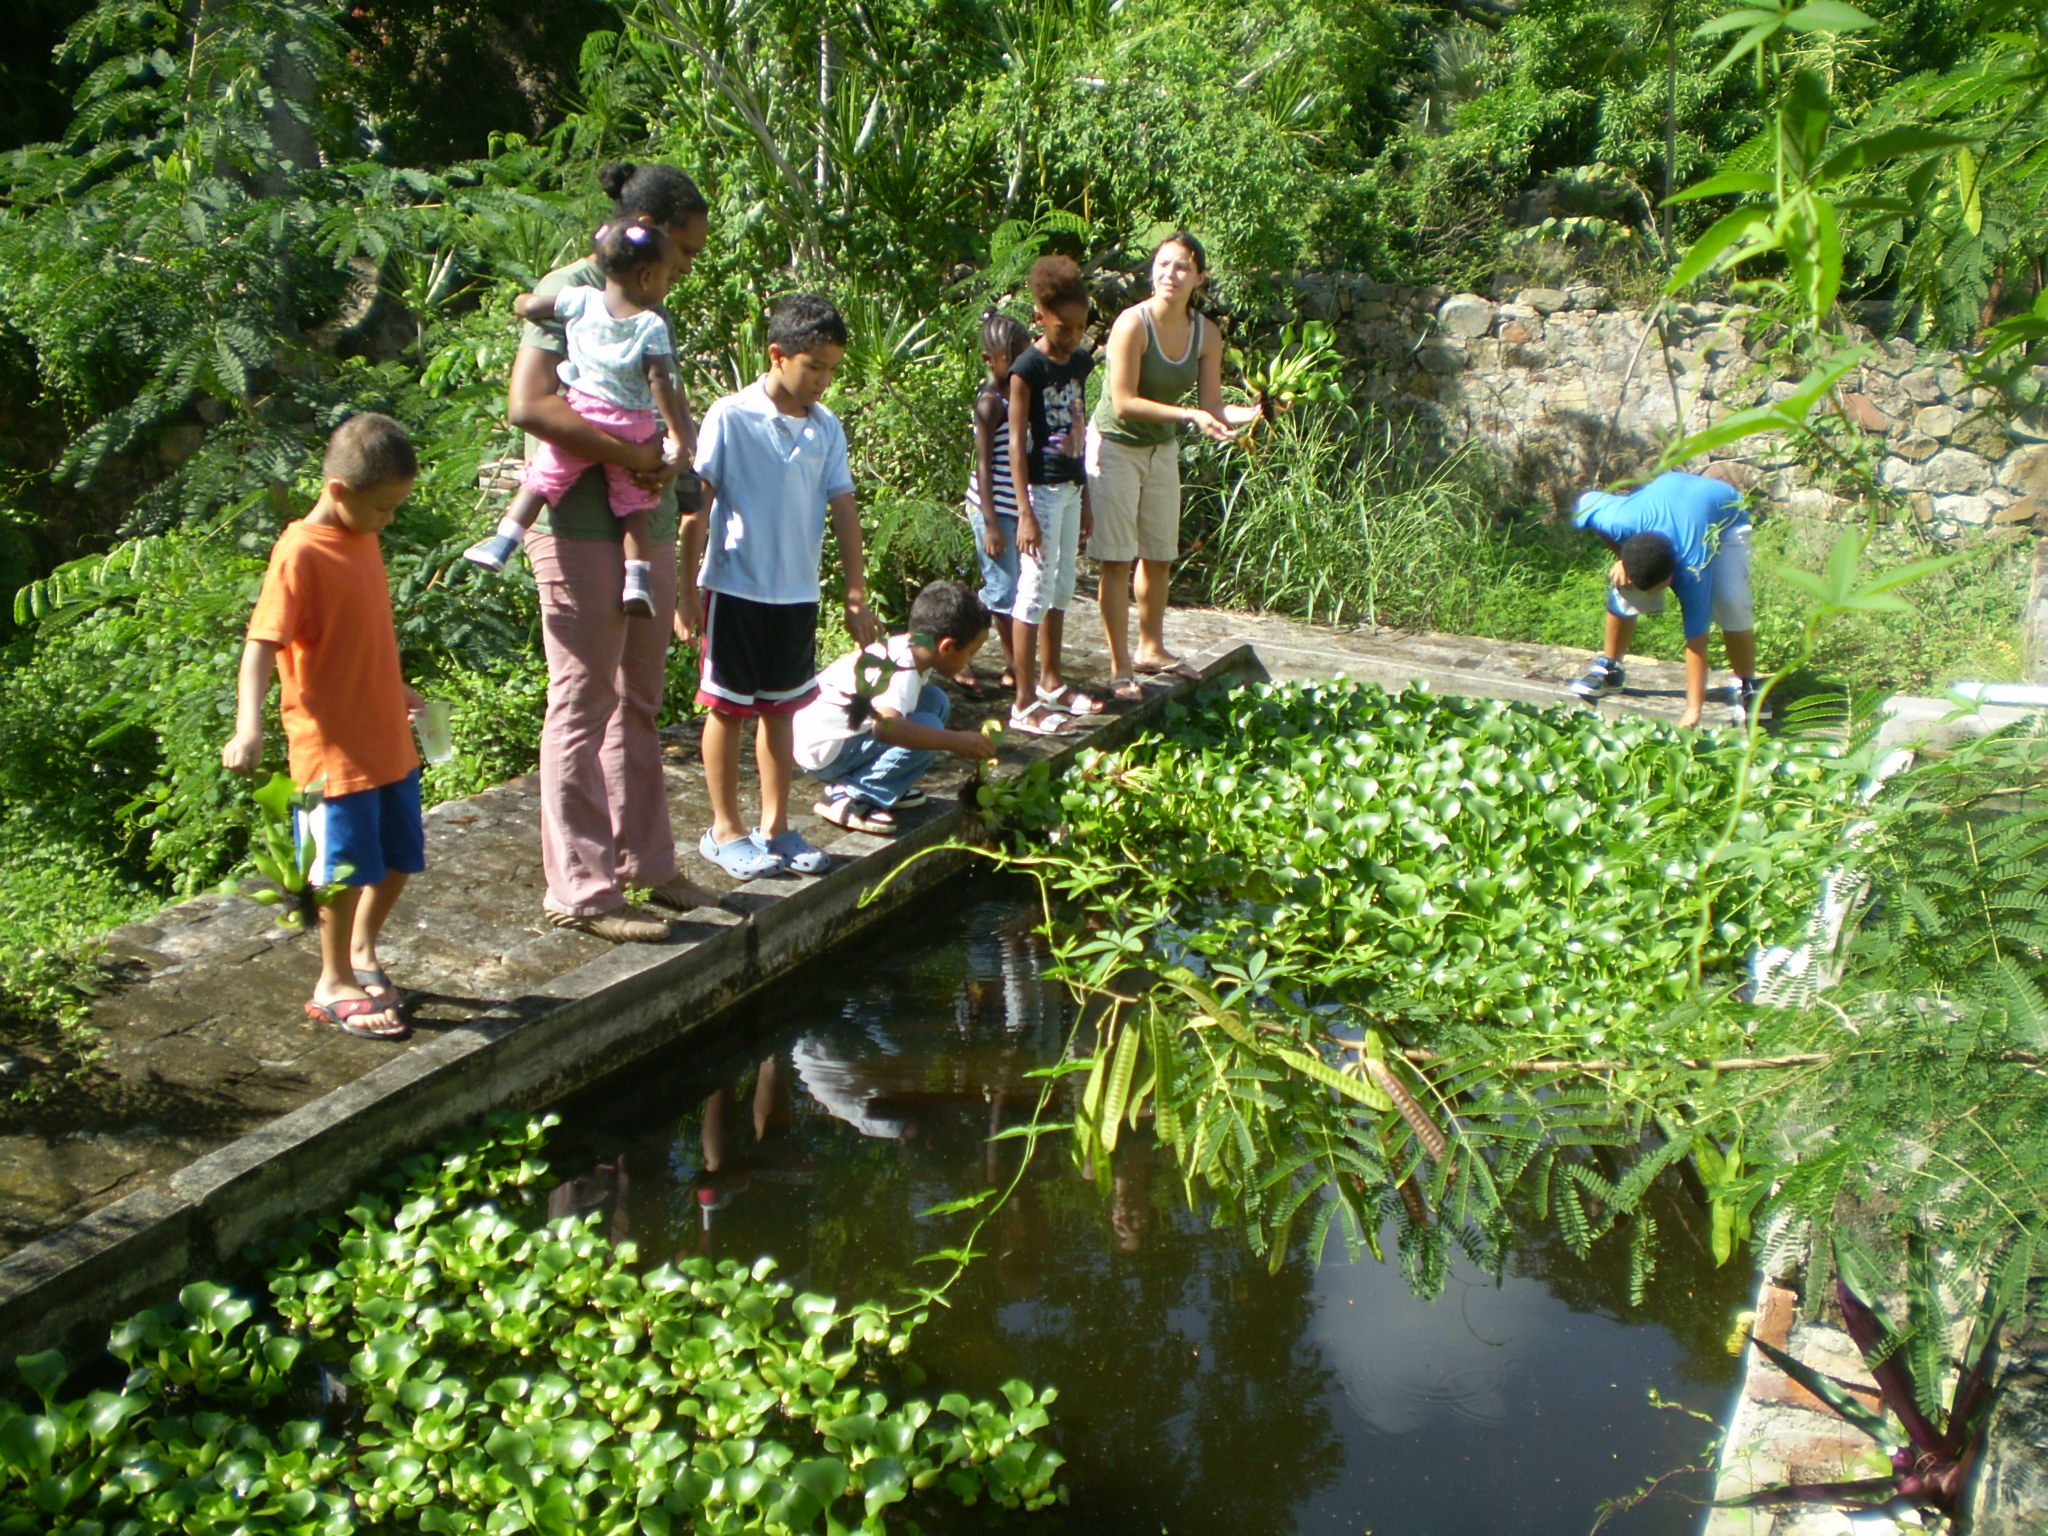 Picking water hyacinths out of a holding pond.